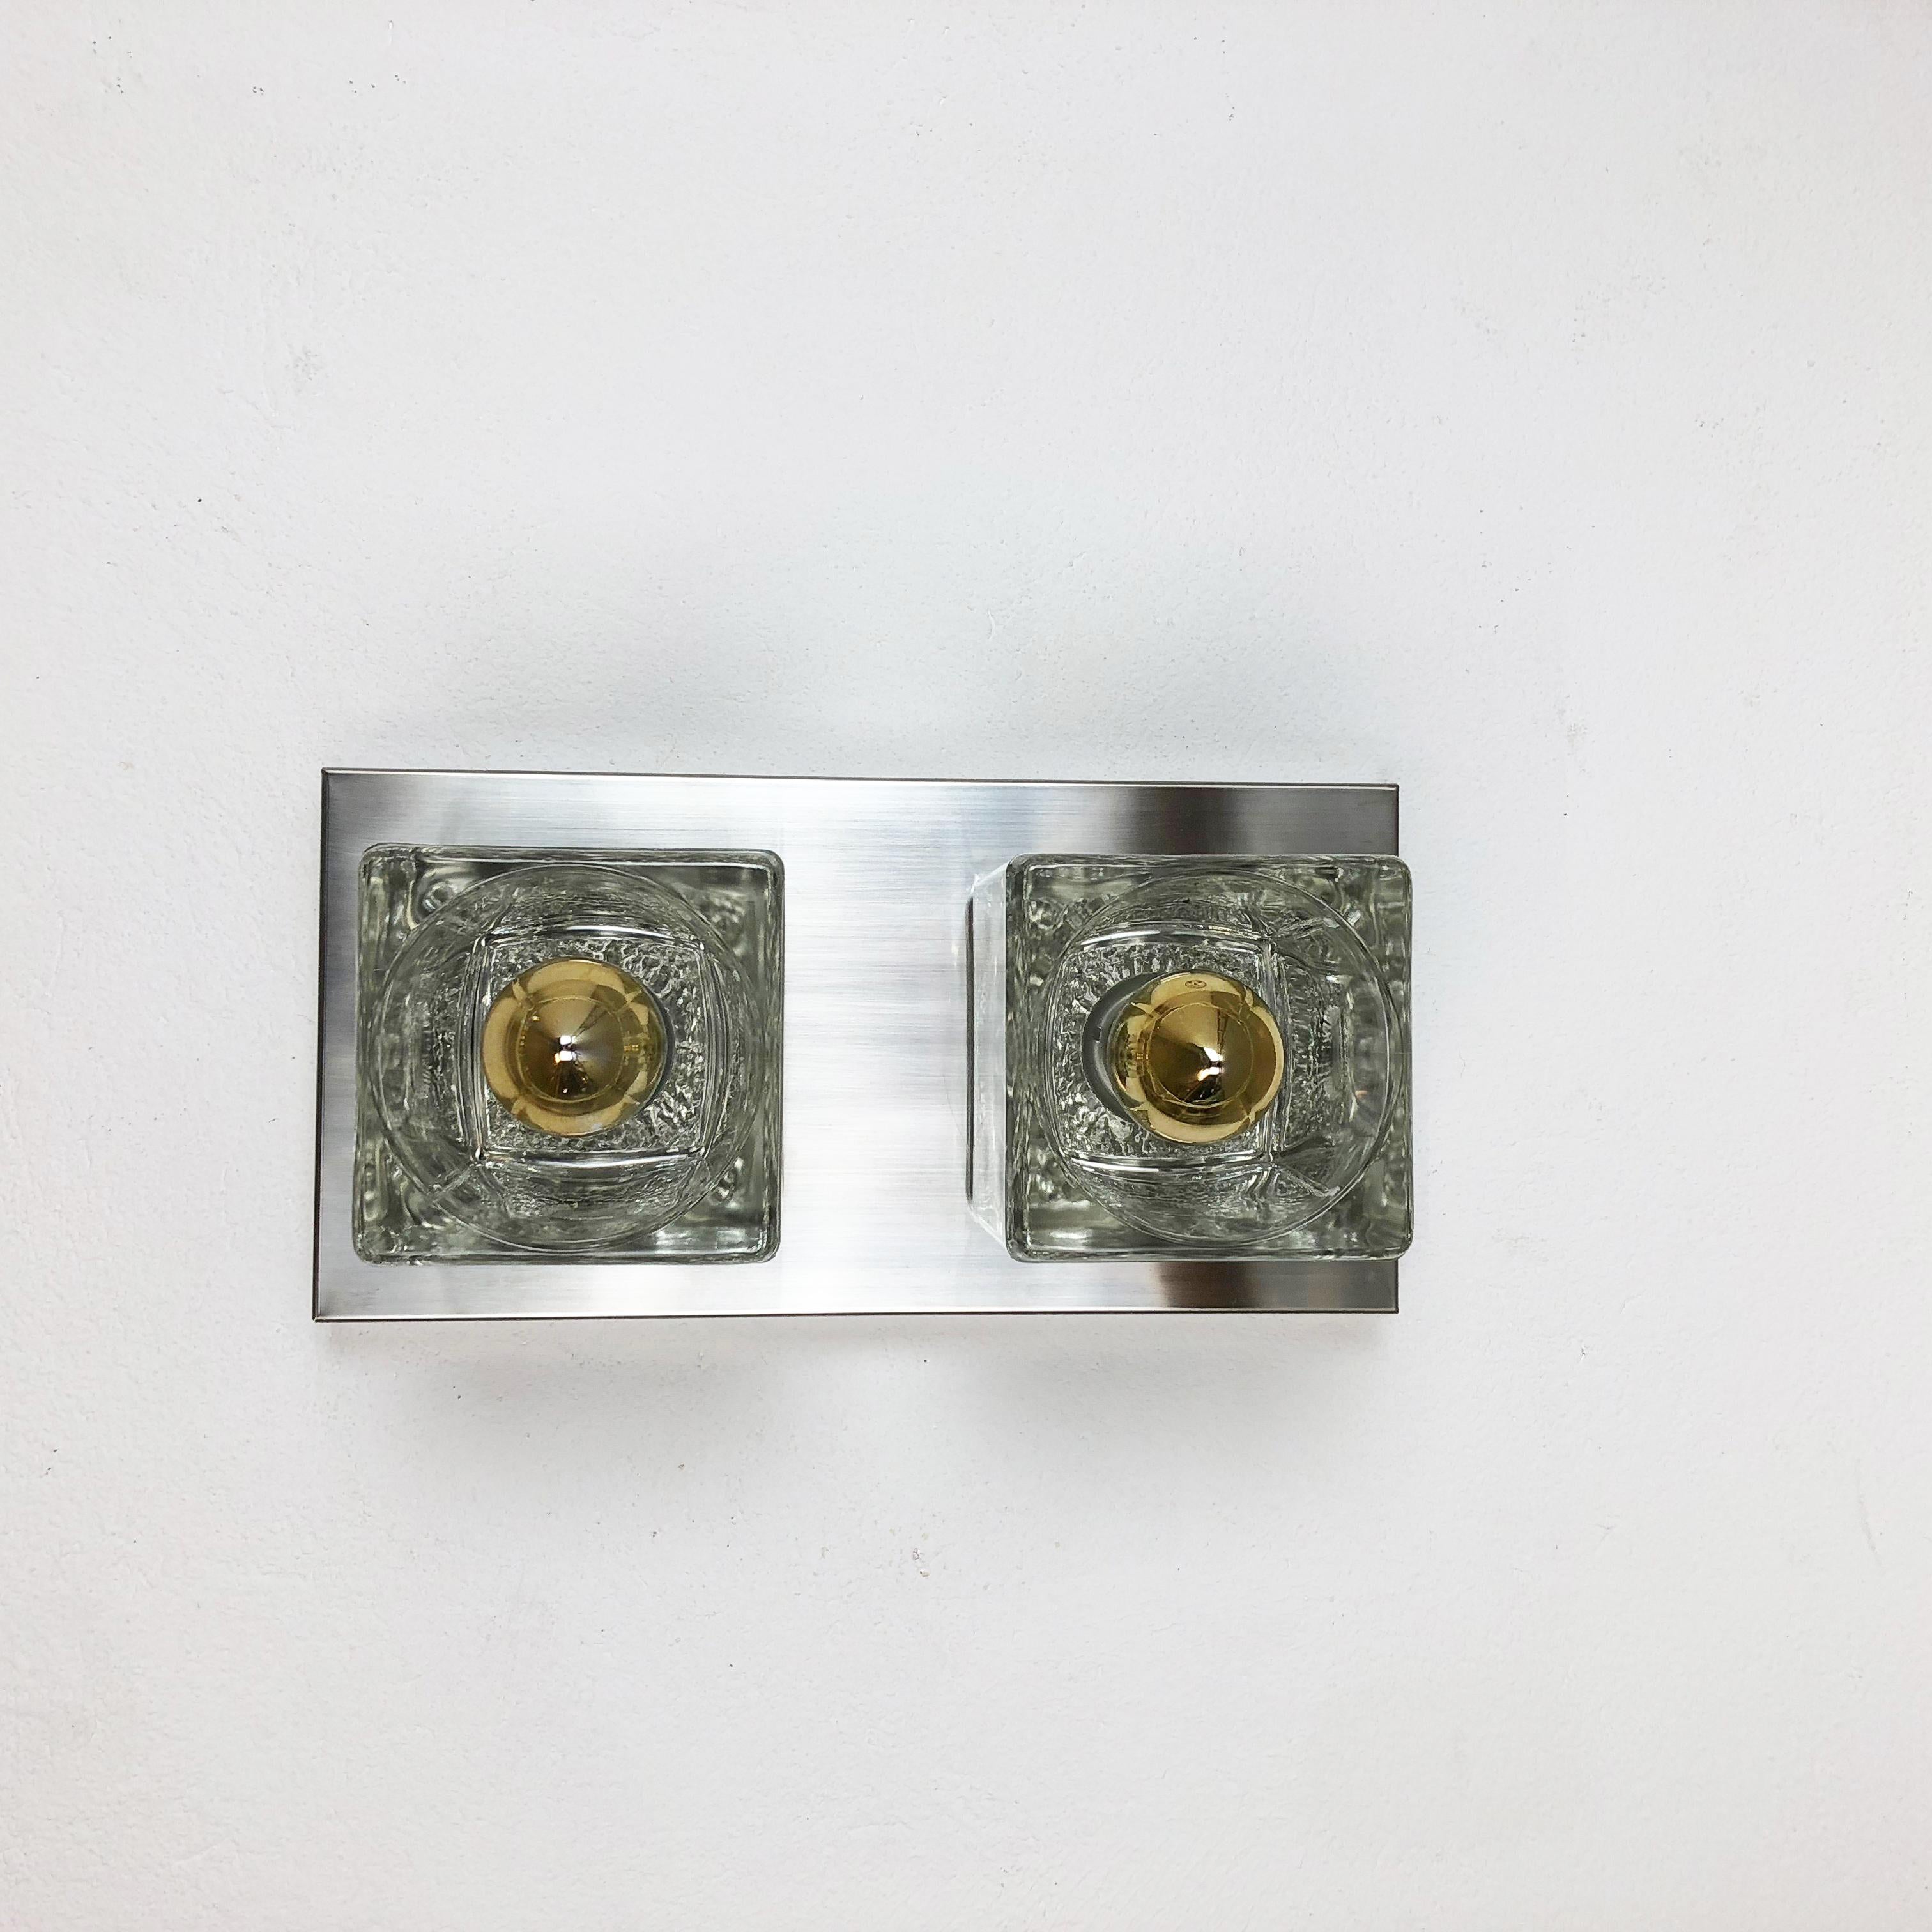 Article:

1 of 2 wall ceiling lights


Producer:

Peill & Putzler, Germany (see label on image)


Origin:

Germany


Age:

1970s



Description:

Original 1970s modernist wall Lights with ice cube form glass lighting elements and a wall metal